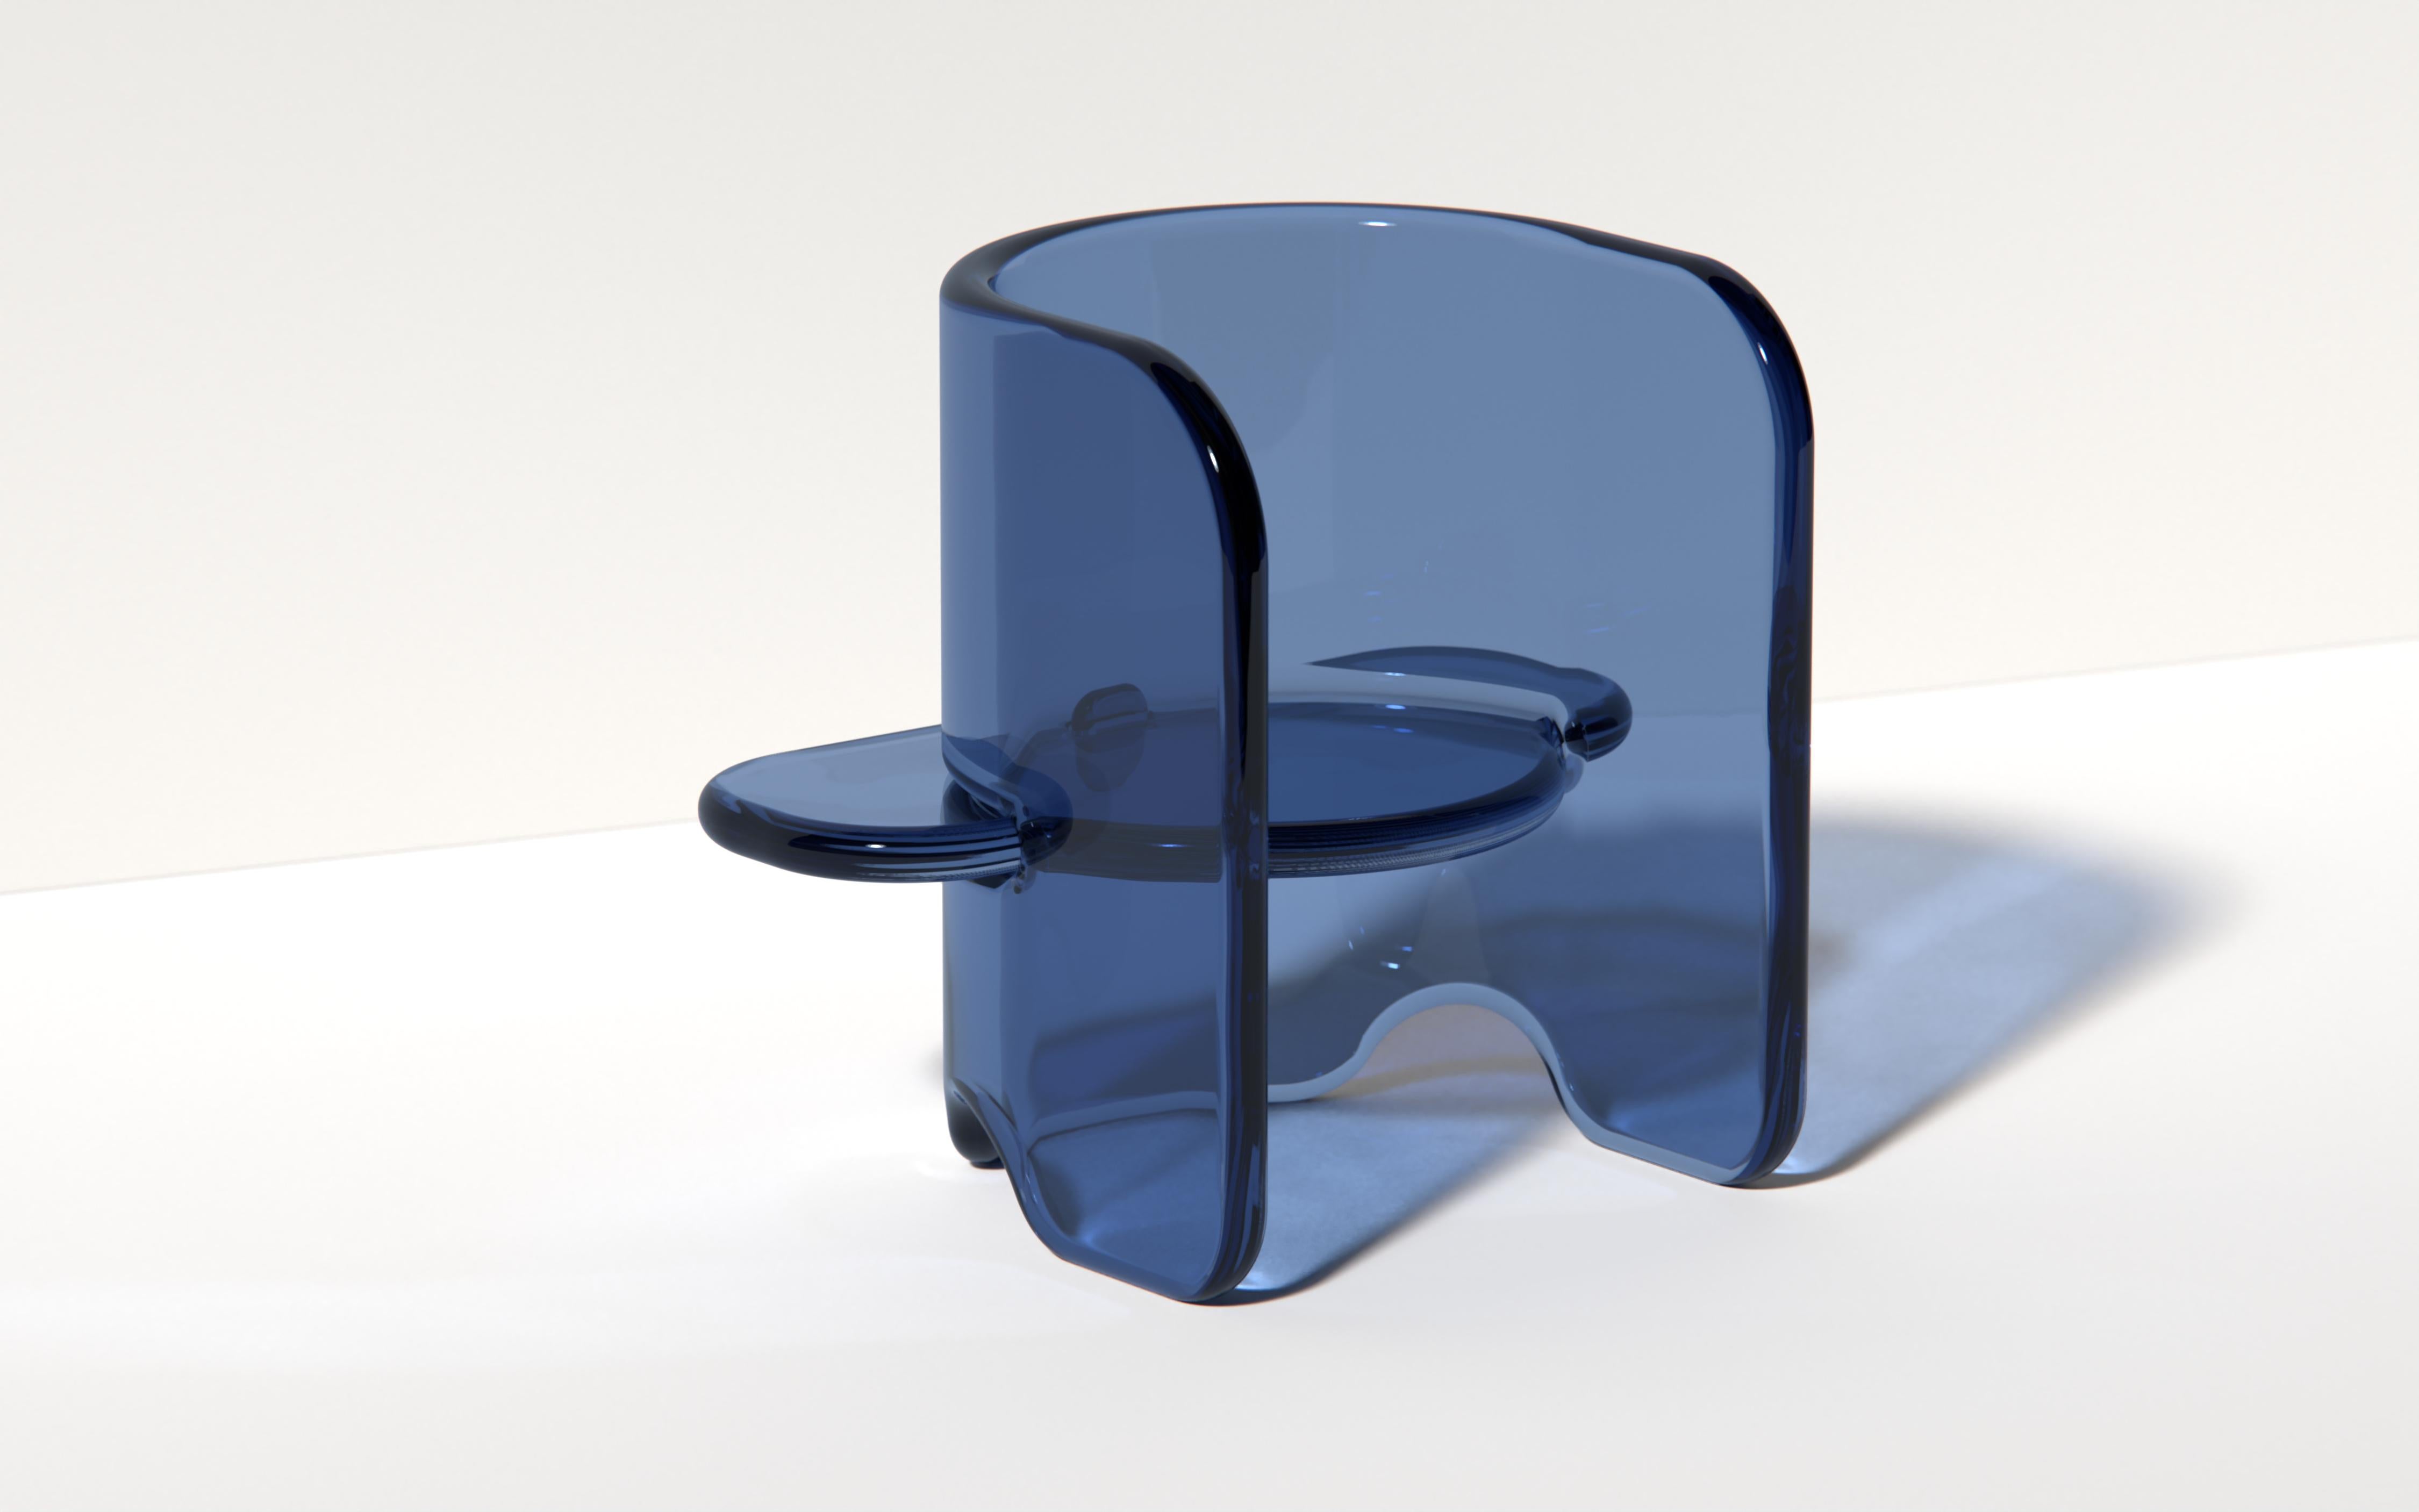 Contemporary Plump Chair by Ian Cochran, Represented by Tuleste Factory For Sale